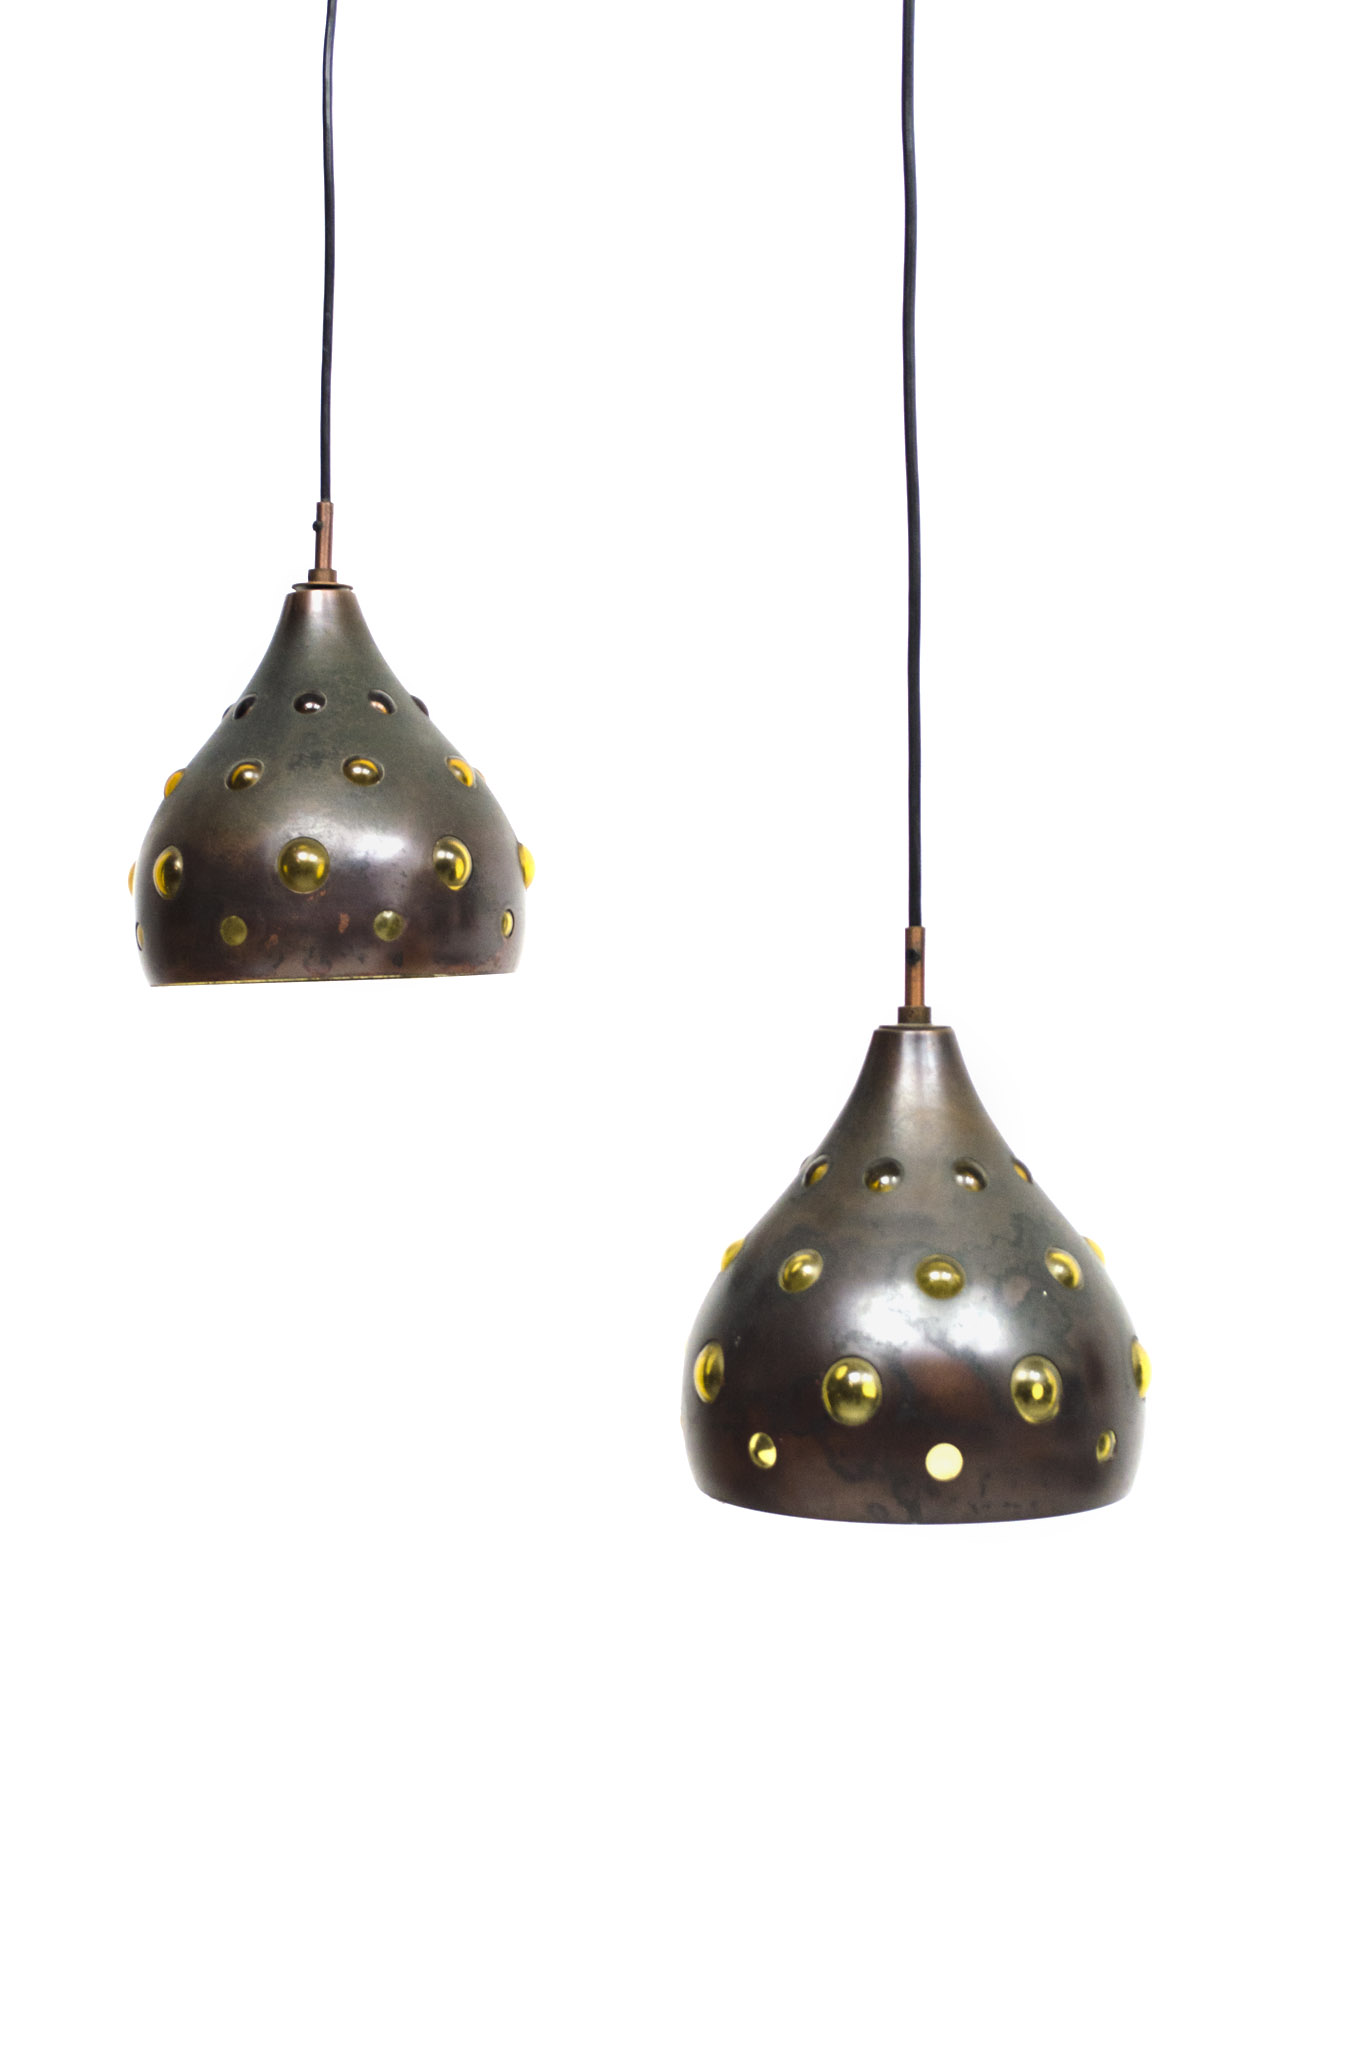 Nanny Still pair of bronze colored hanging lamps with glass